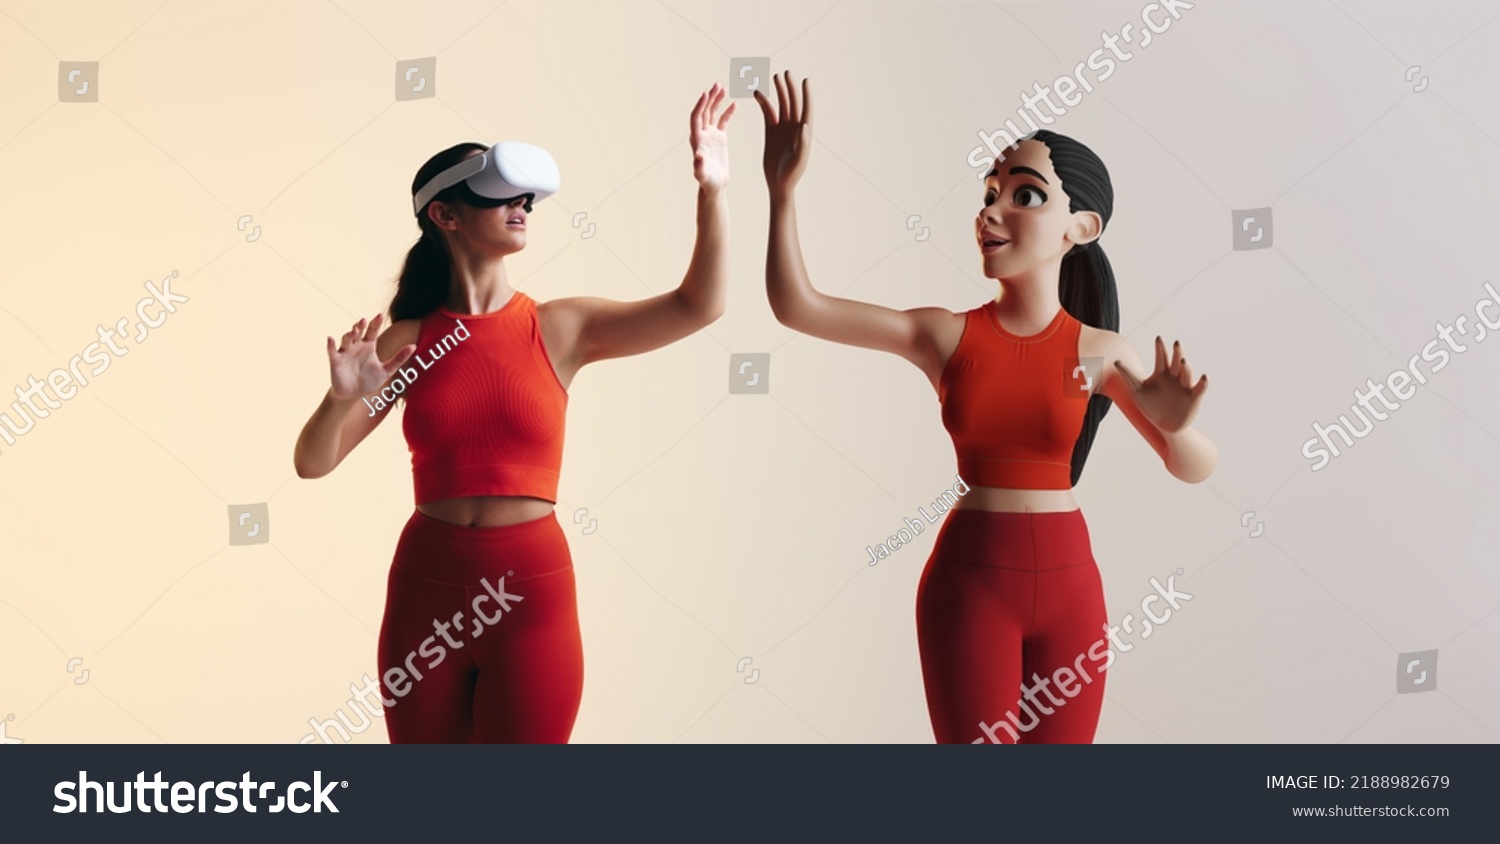 Getting into the metaverse. Sporty young woman playing virtual reality games as a 3D avatar. Young woman interacting with immersive technology using a virtual reality headset. #2188982679